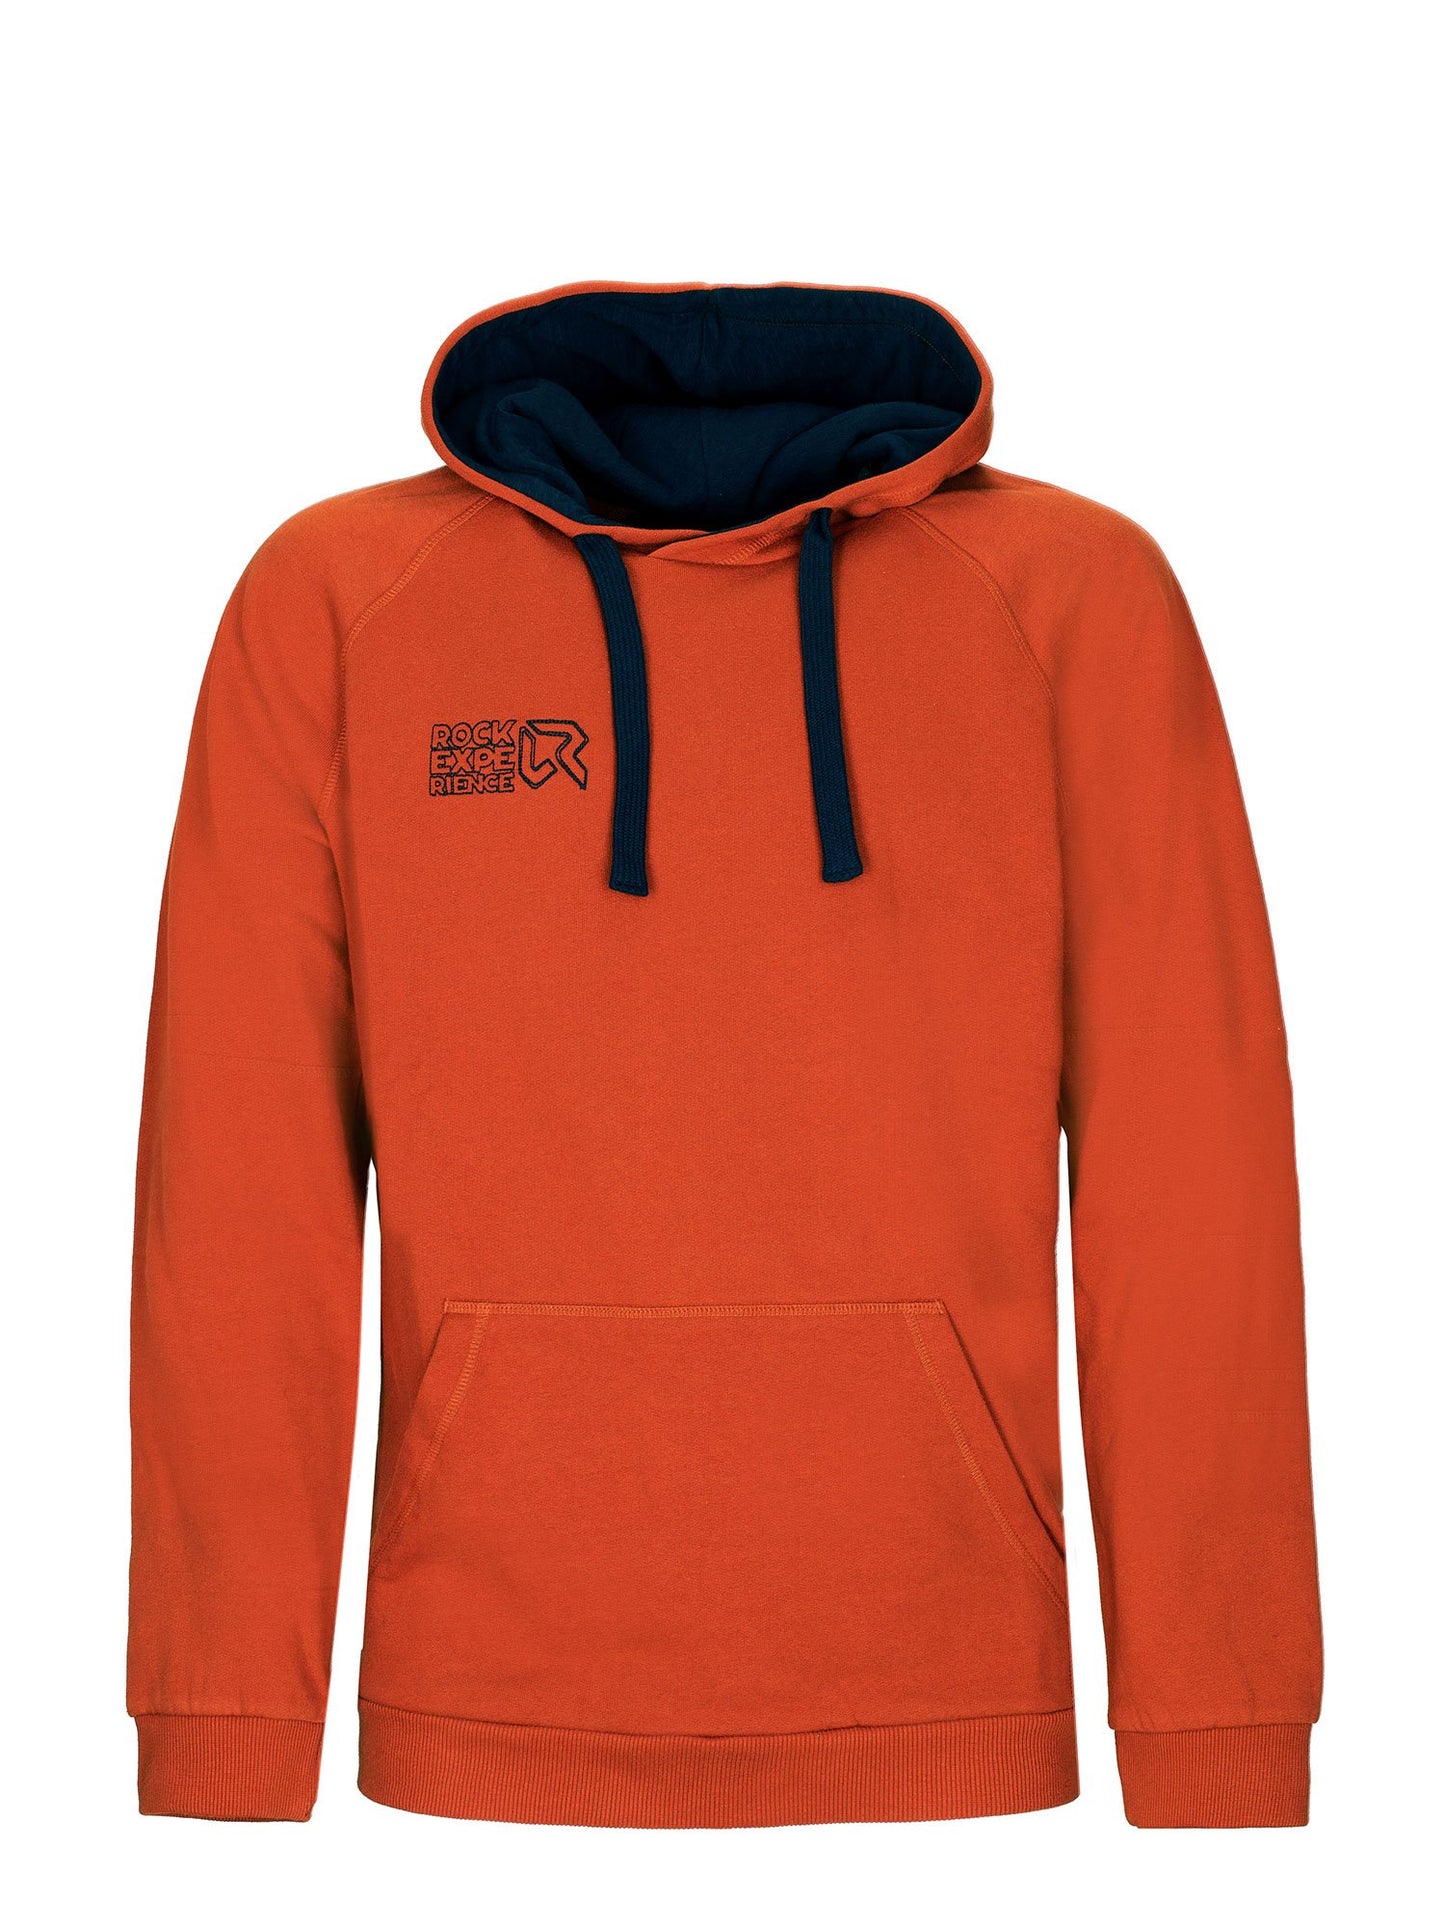 AMPLESSO COMPLESSO HOODIE MAN FLEECE